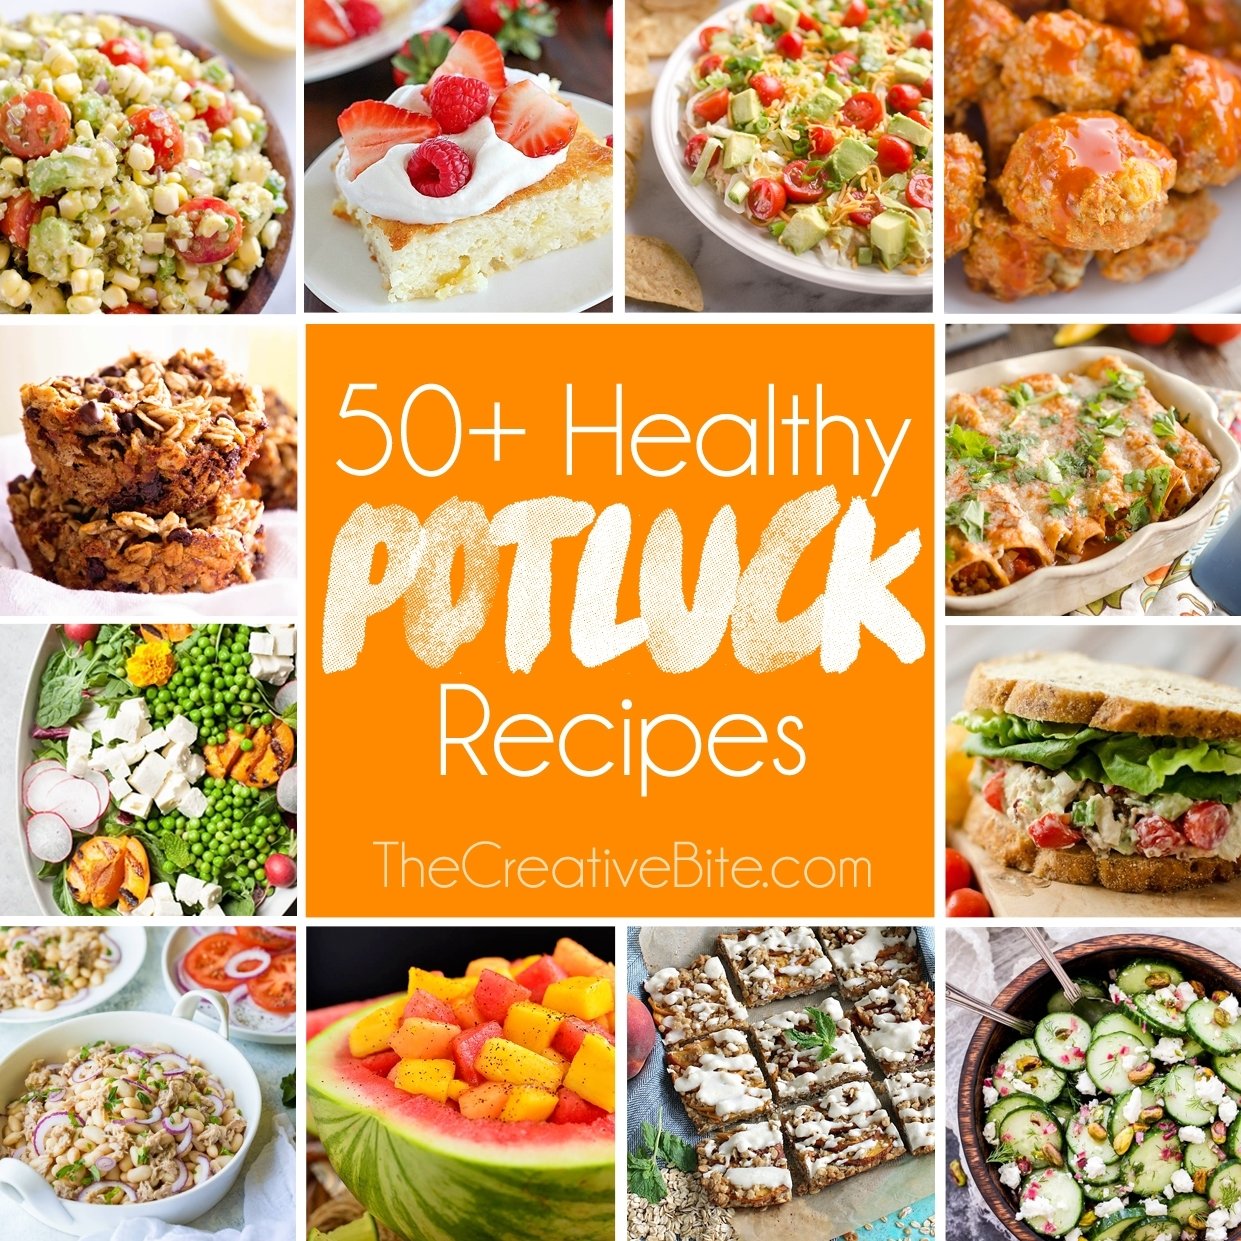 10 Wonderful Potluck Ideas For Work Lunch 50 light healthy potluck recipes 2 2022